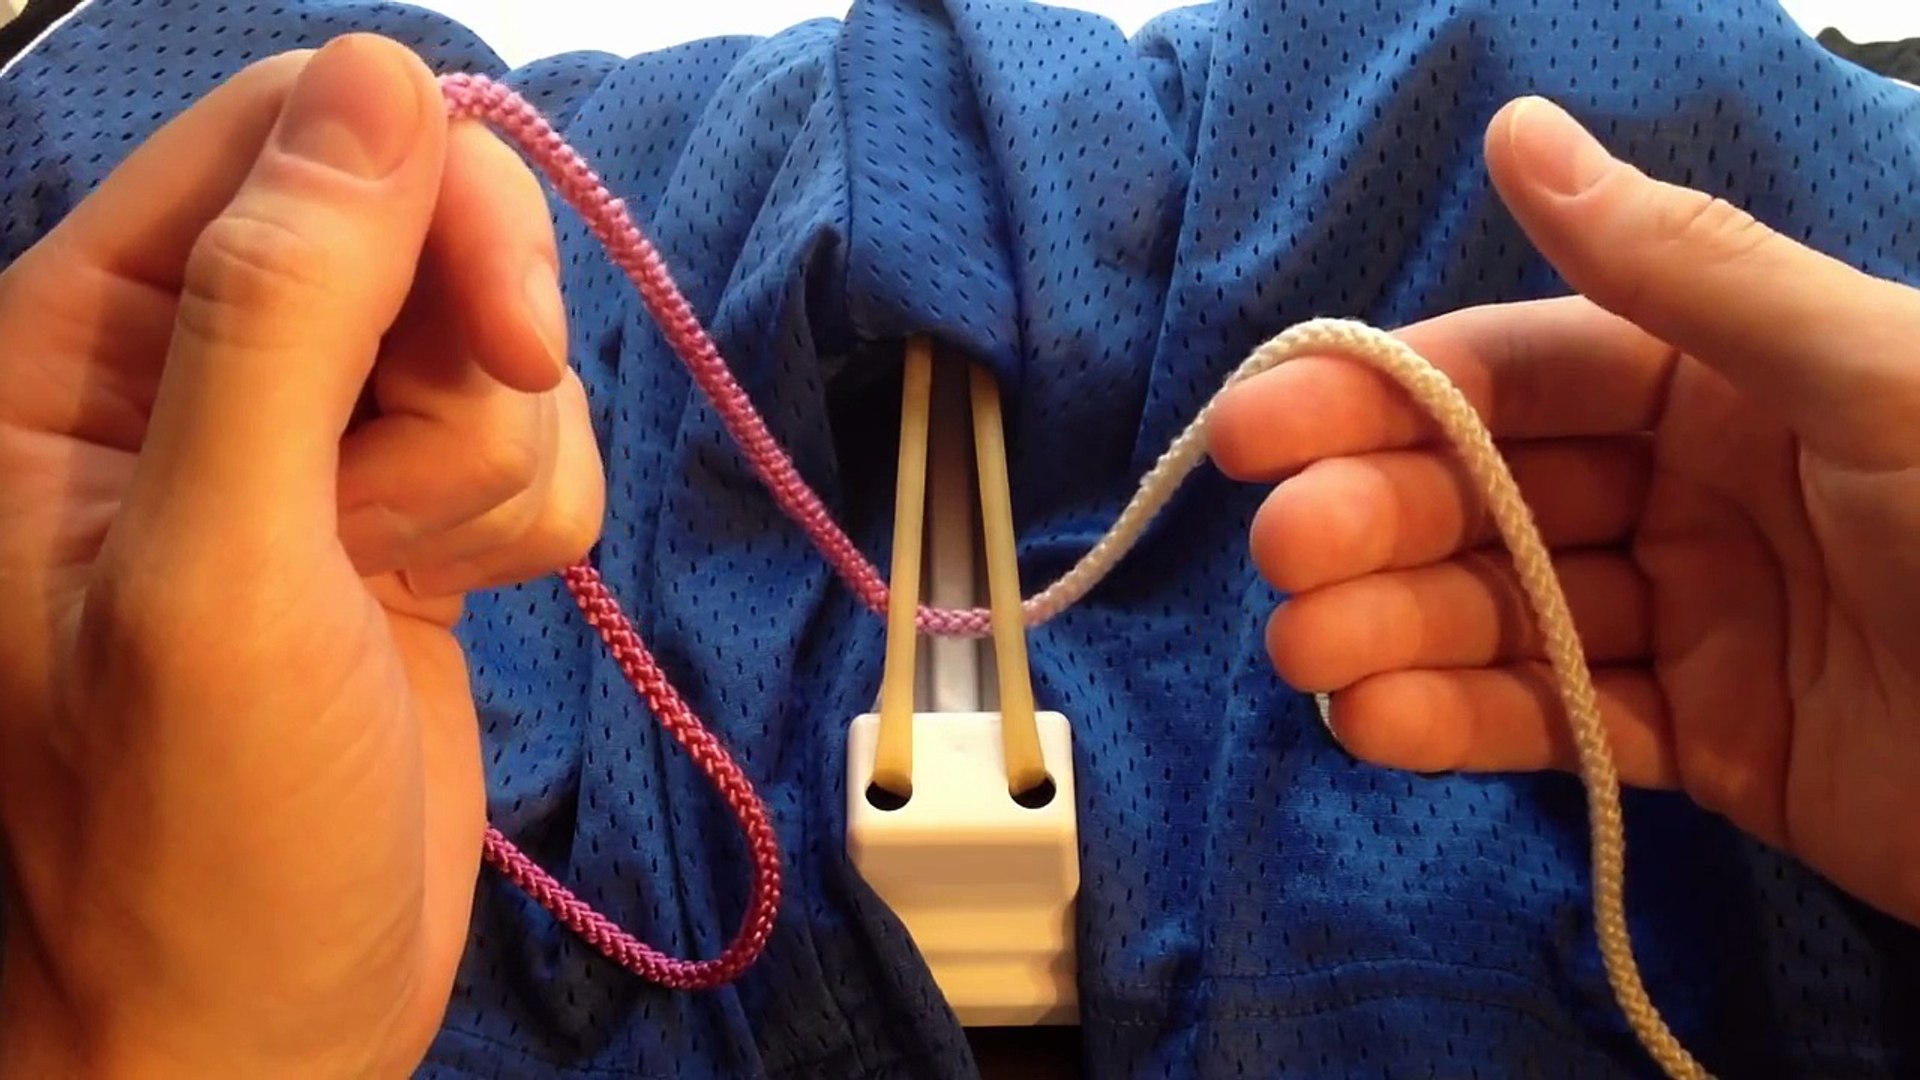 Surgical Knot Tying: One-handed, Righty - video Dailymotion